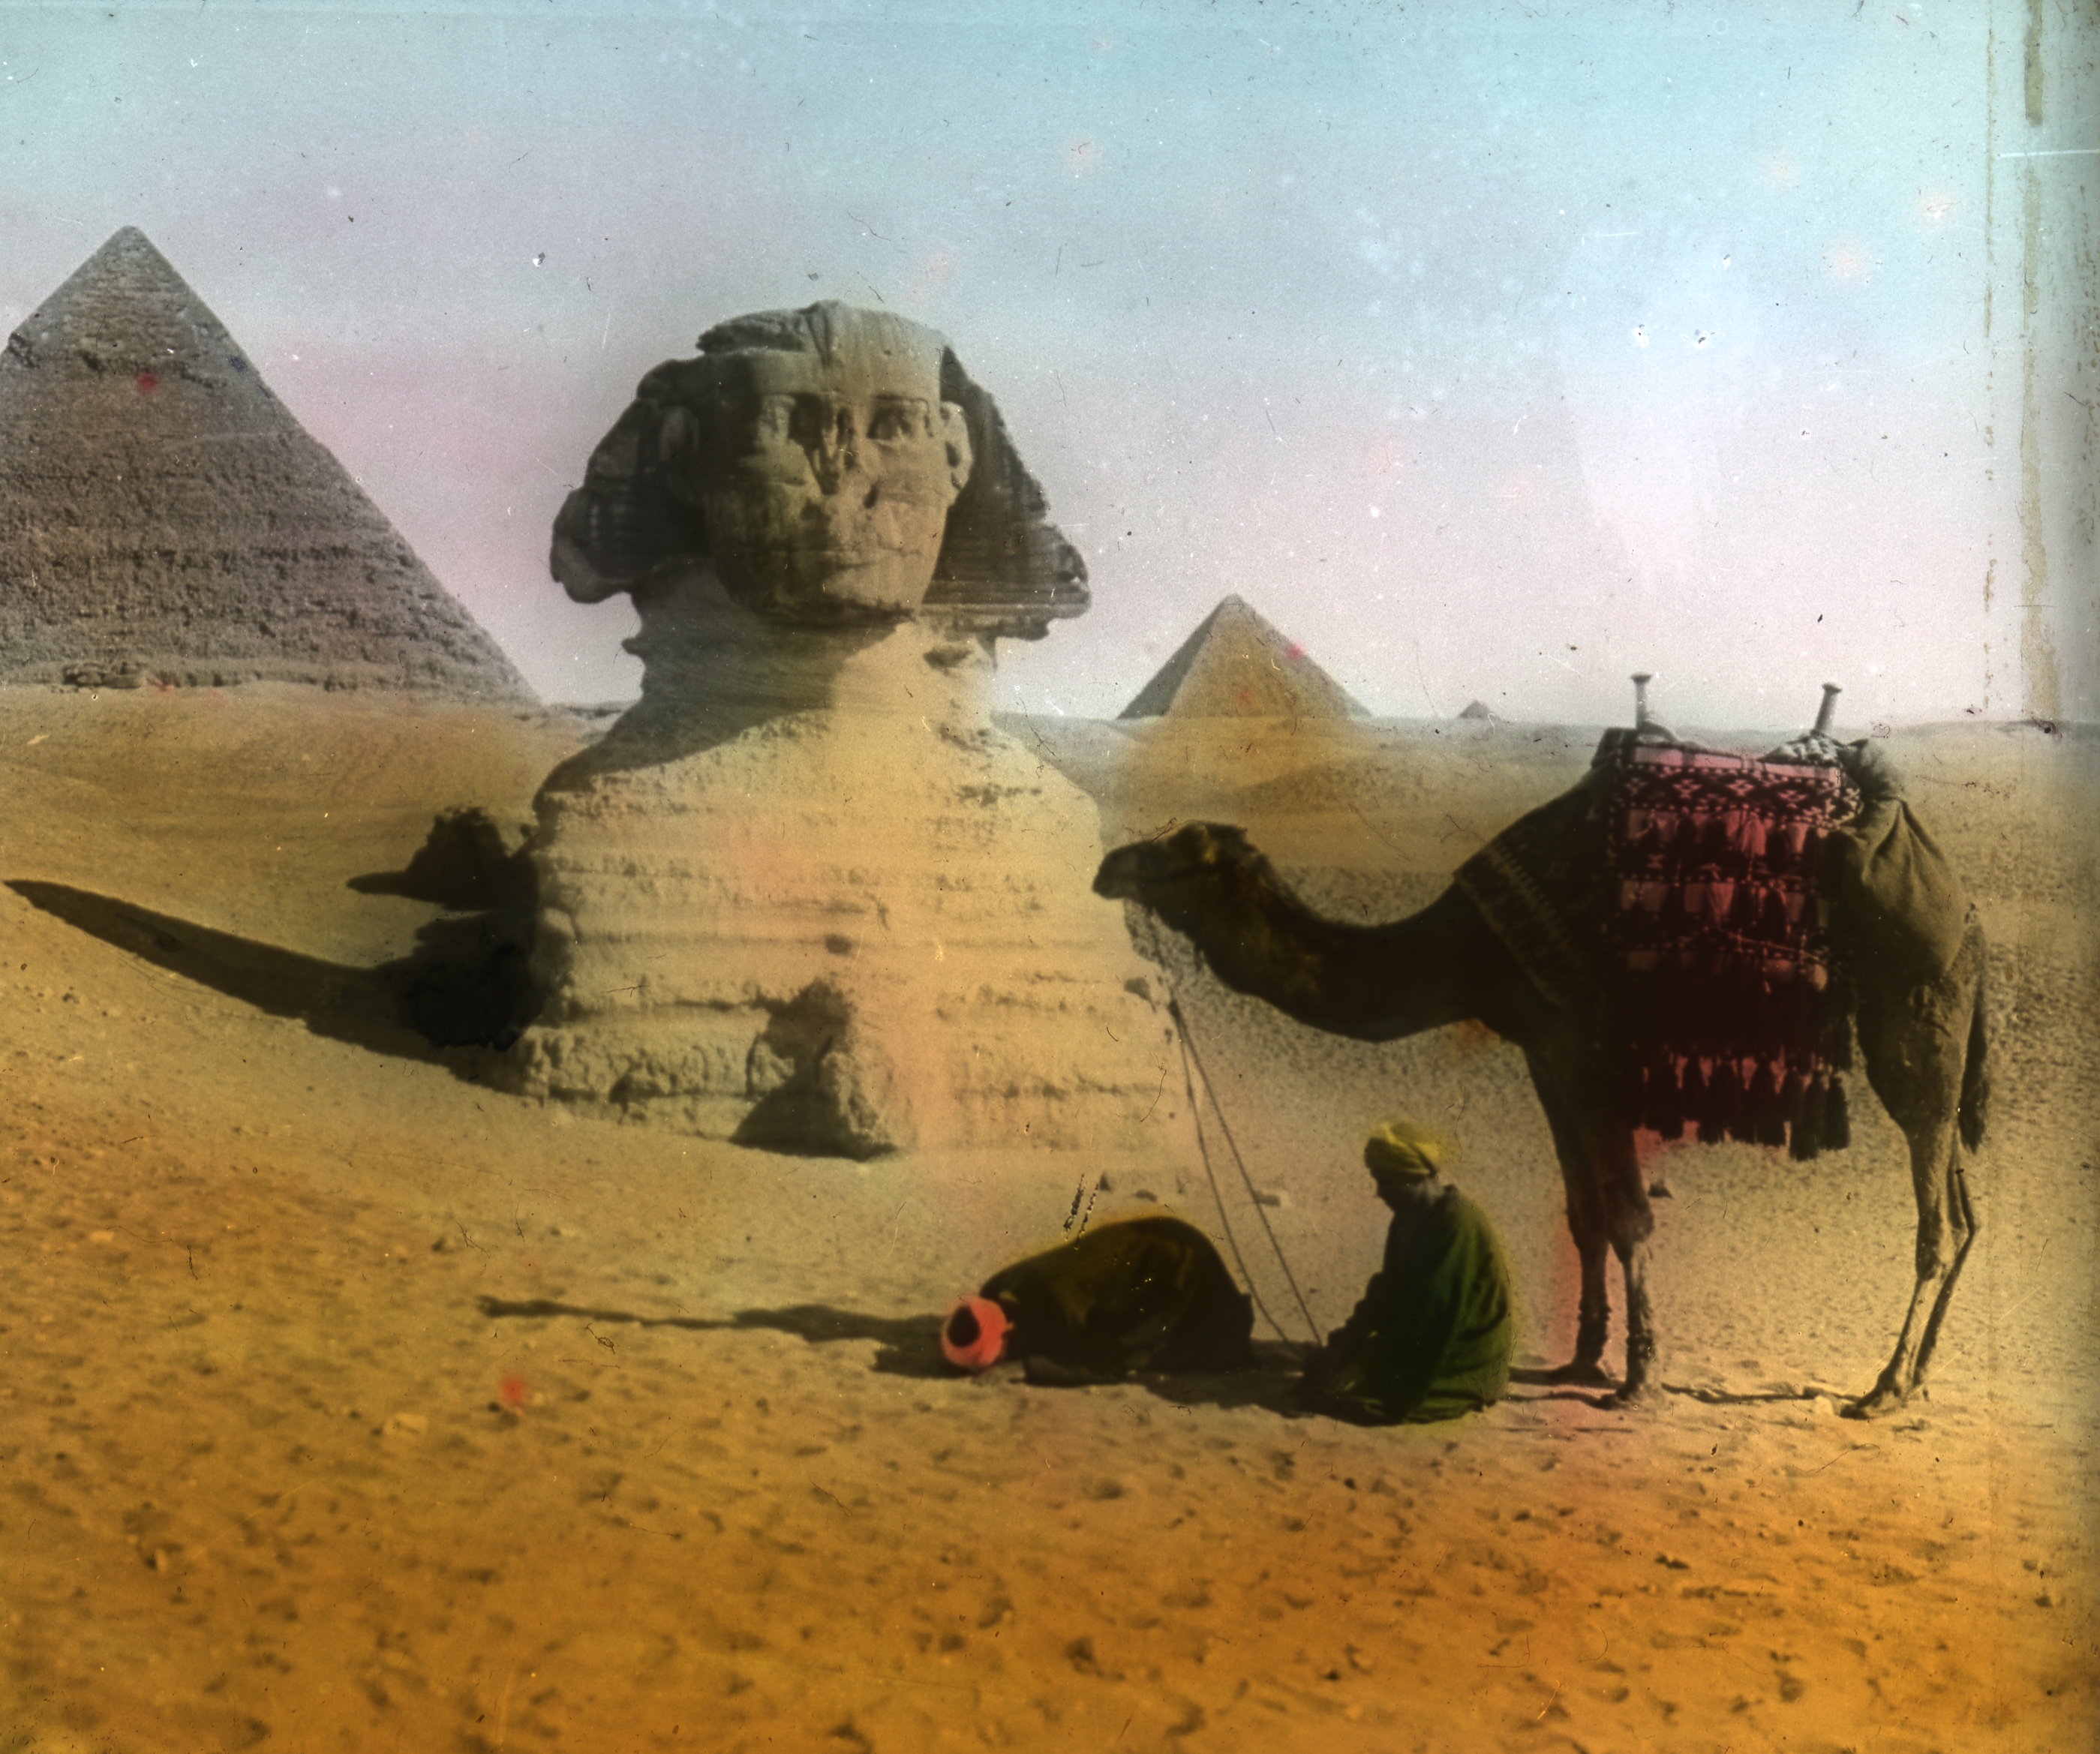 Views, Objects: Egypt. Gizeh [selected images]. View 06: Sphinx and Pyramid., n.d. Brooklyn Museum Archives